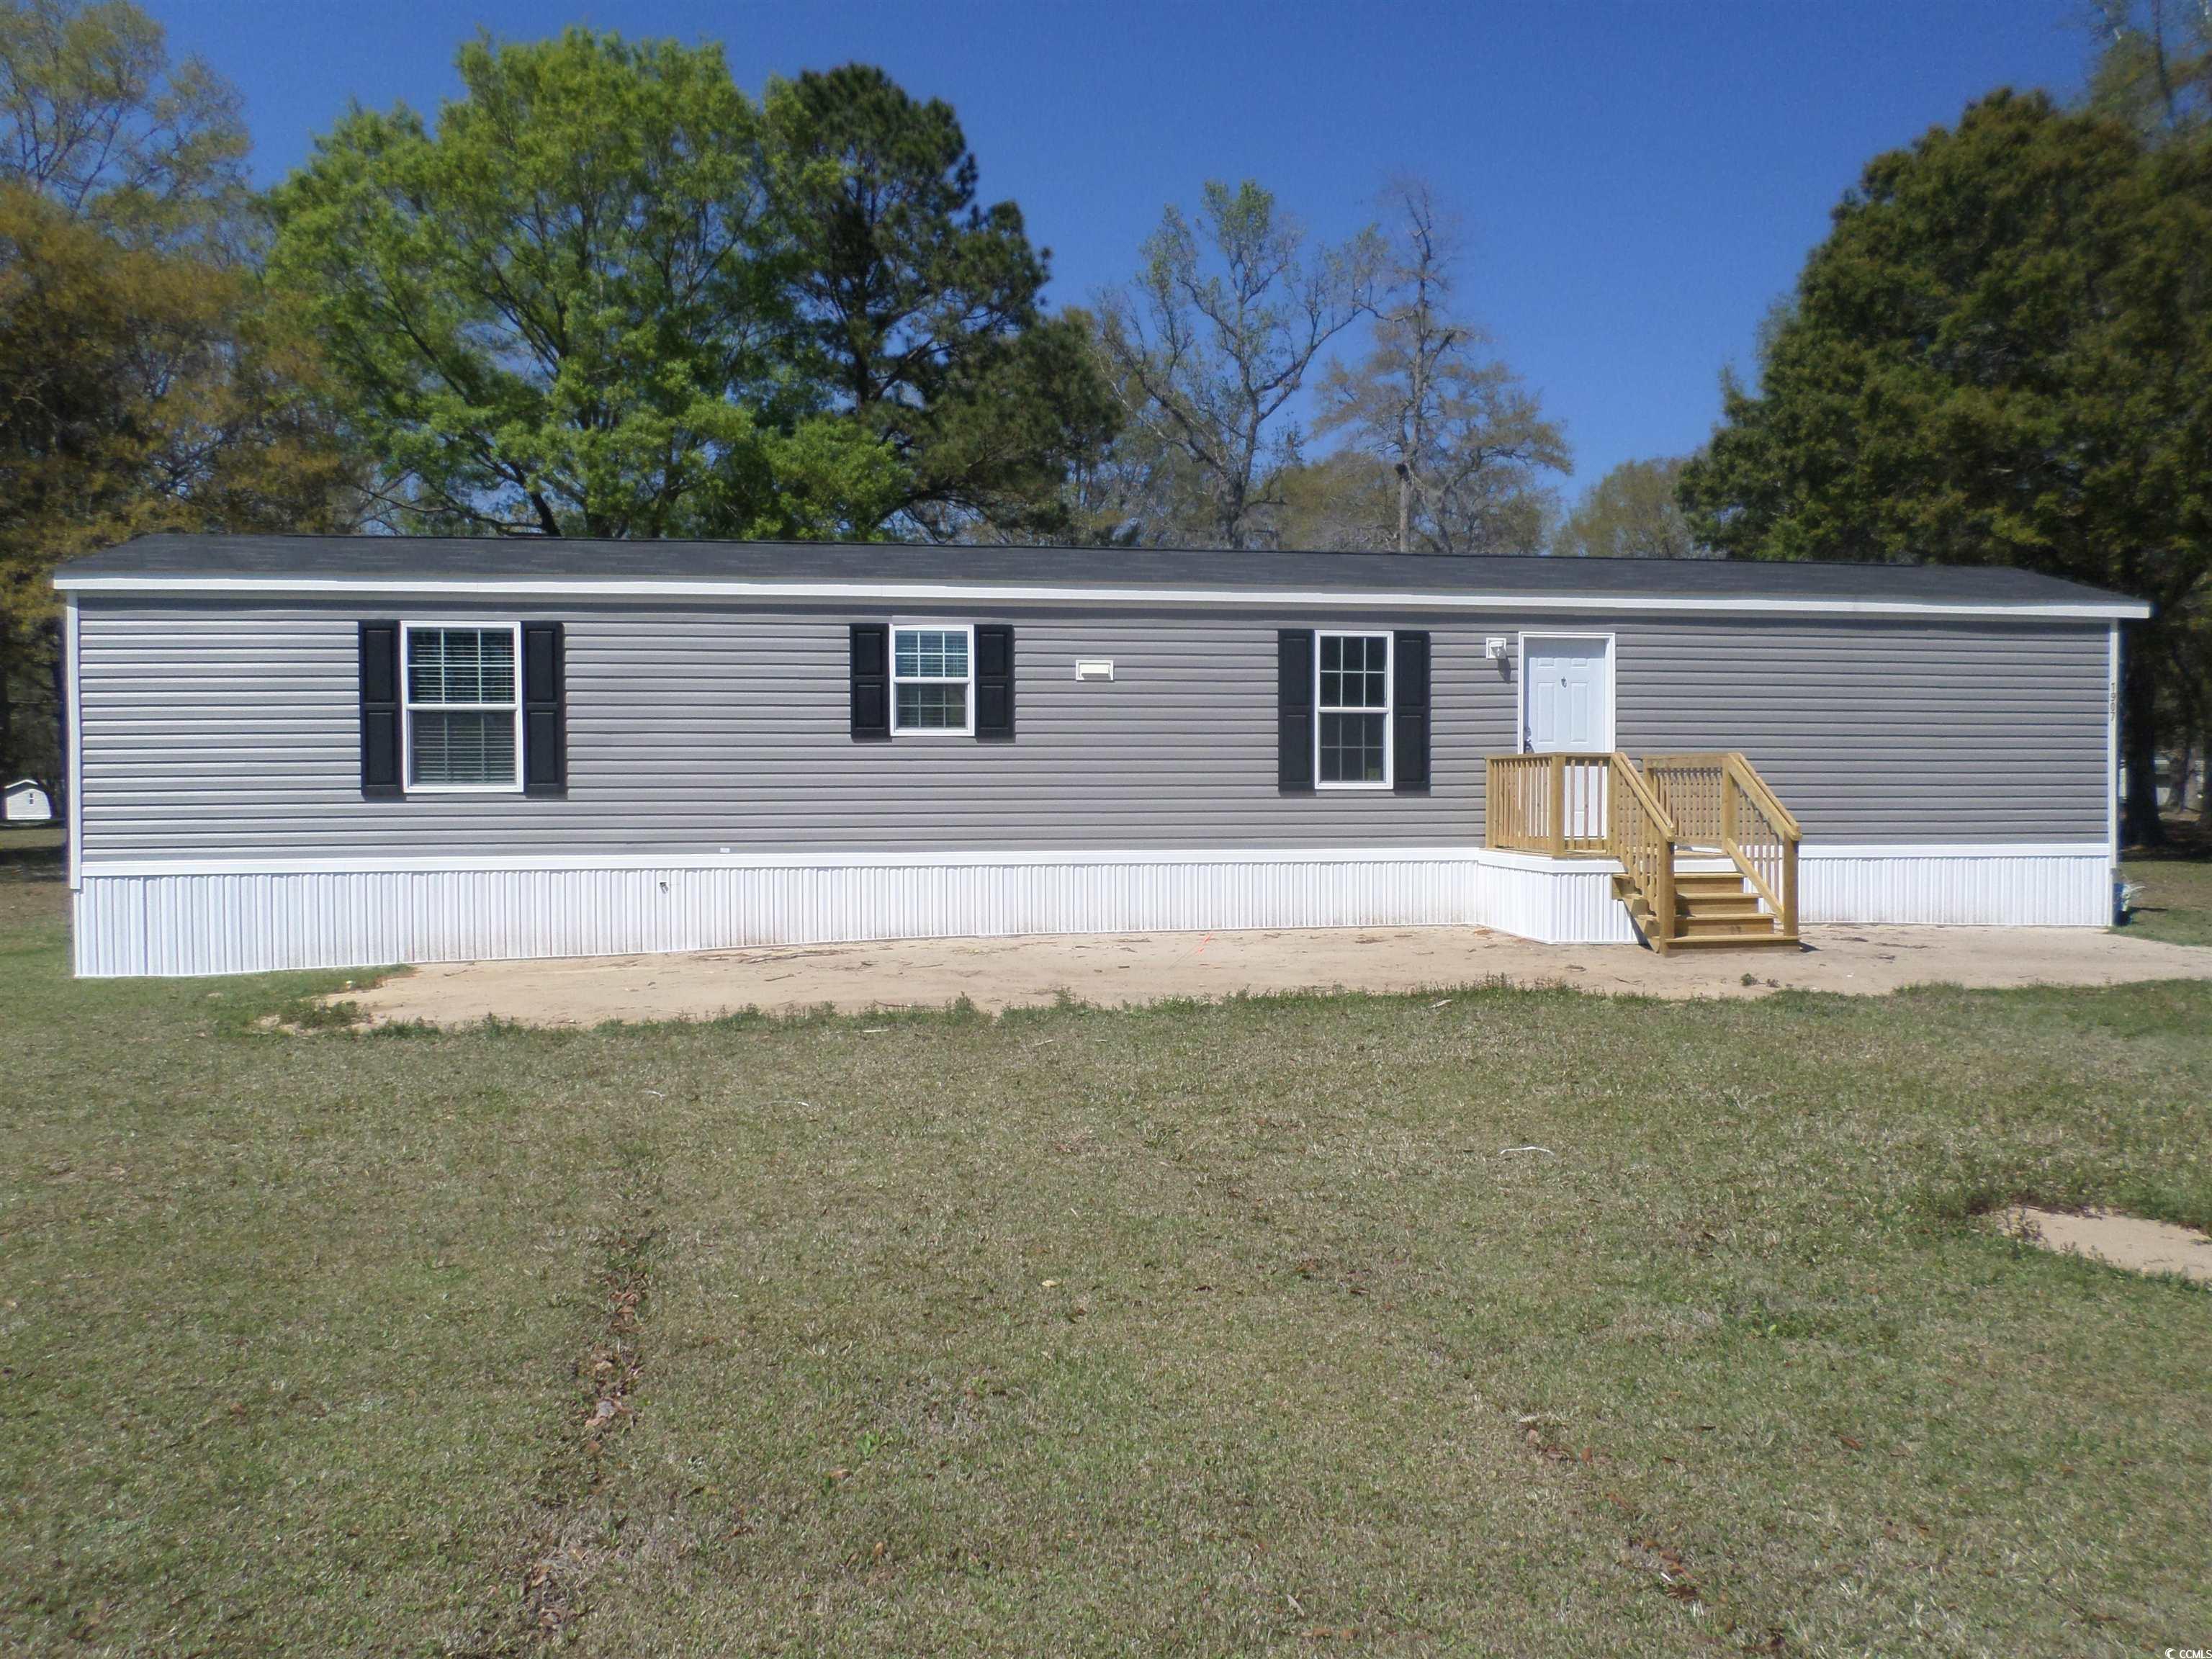 affordable 2024 new 2 bedroom 2 bath singlewide manufactured home is set up in the leased land community of williamson's estate, conway, sc. the home has an appliance package to include microwave, dishwasher, range and refrigerator,  split bedroom floor plan with master ensuite, tub/shower combination and the home is plumbed for washer and dryer hook ups.  the open floor space is great for entertaining guests.  the kitchen dining room combination flows nicely together and the lovely vinyl flooring is easily maintained throughout the home.  two decks are constructed on the front door entry and rear door exit.  the lot has plenty of room for a storage building.   this home is affordable and the manufacturer offers a one year warranty. a must see today.